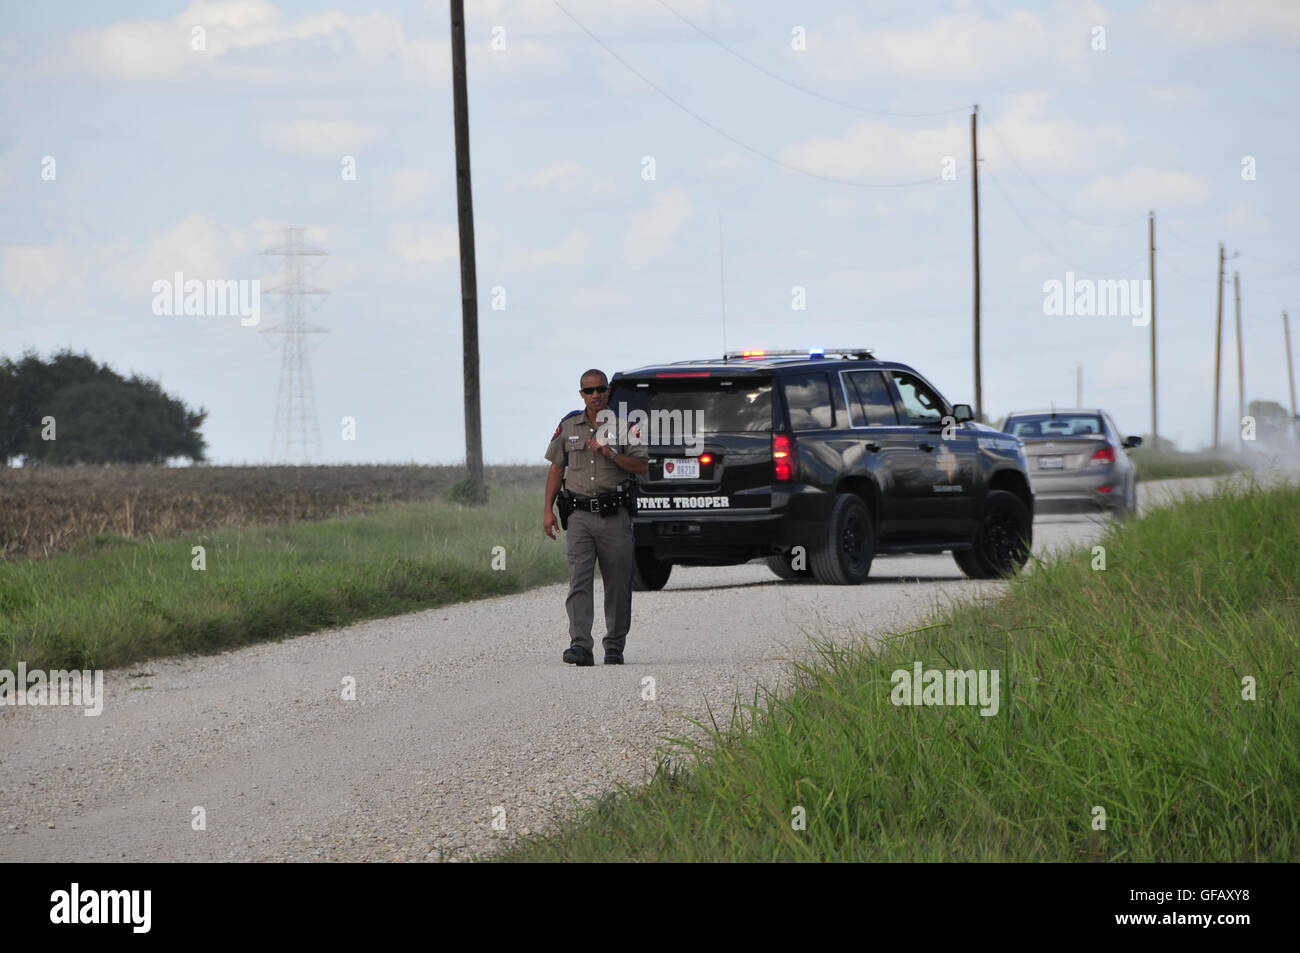 (160731) -- LOCKHART, July 31, 2016 (Xinhua) -- A police officer works at the site of a balloon crash accident near Lockhart, a city in the central part of the U.S. state of Texas, July 30, 2016. U.S. Texas Department of PUBLIC Safety has confirmed that 16 people were killed on Saturday morning after a hot air balloon caught on fire and crashed near Lockhart. The accident occurred shortly after 7:40 a.m. local time on Saturday near Lockhart, when the hot air balloon with at least 16 people on board crashed into a pasture, the Federal Aviation Administration (FAA) said in a statement on Saturda Stock Photo